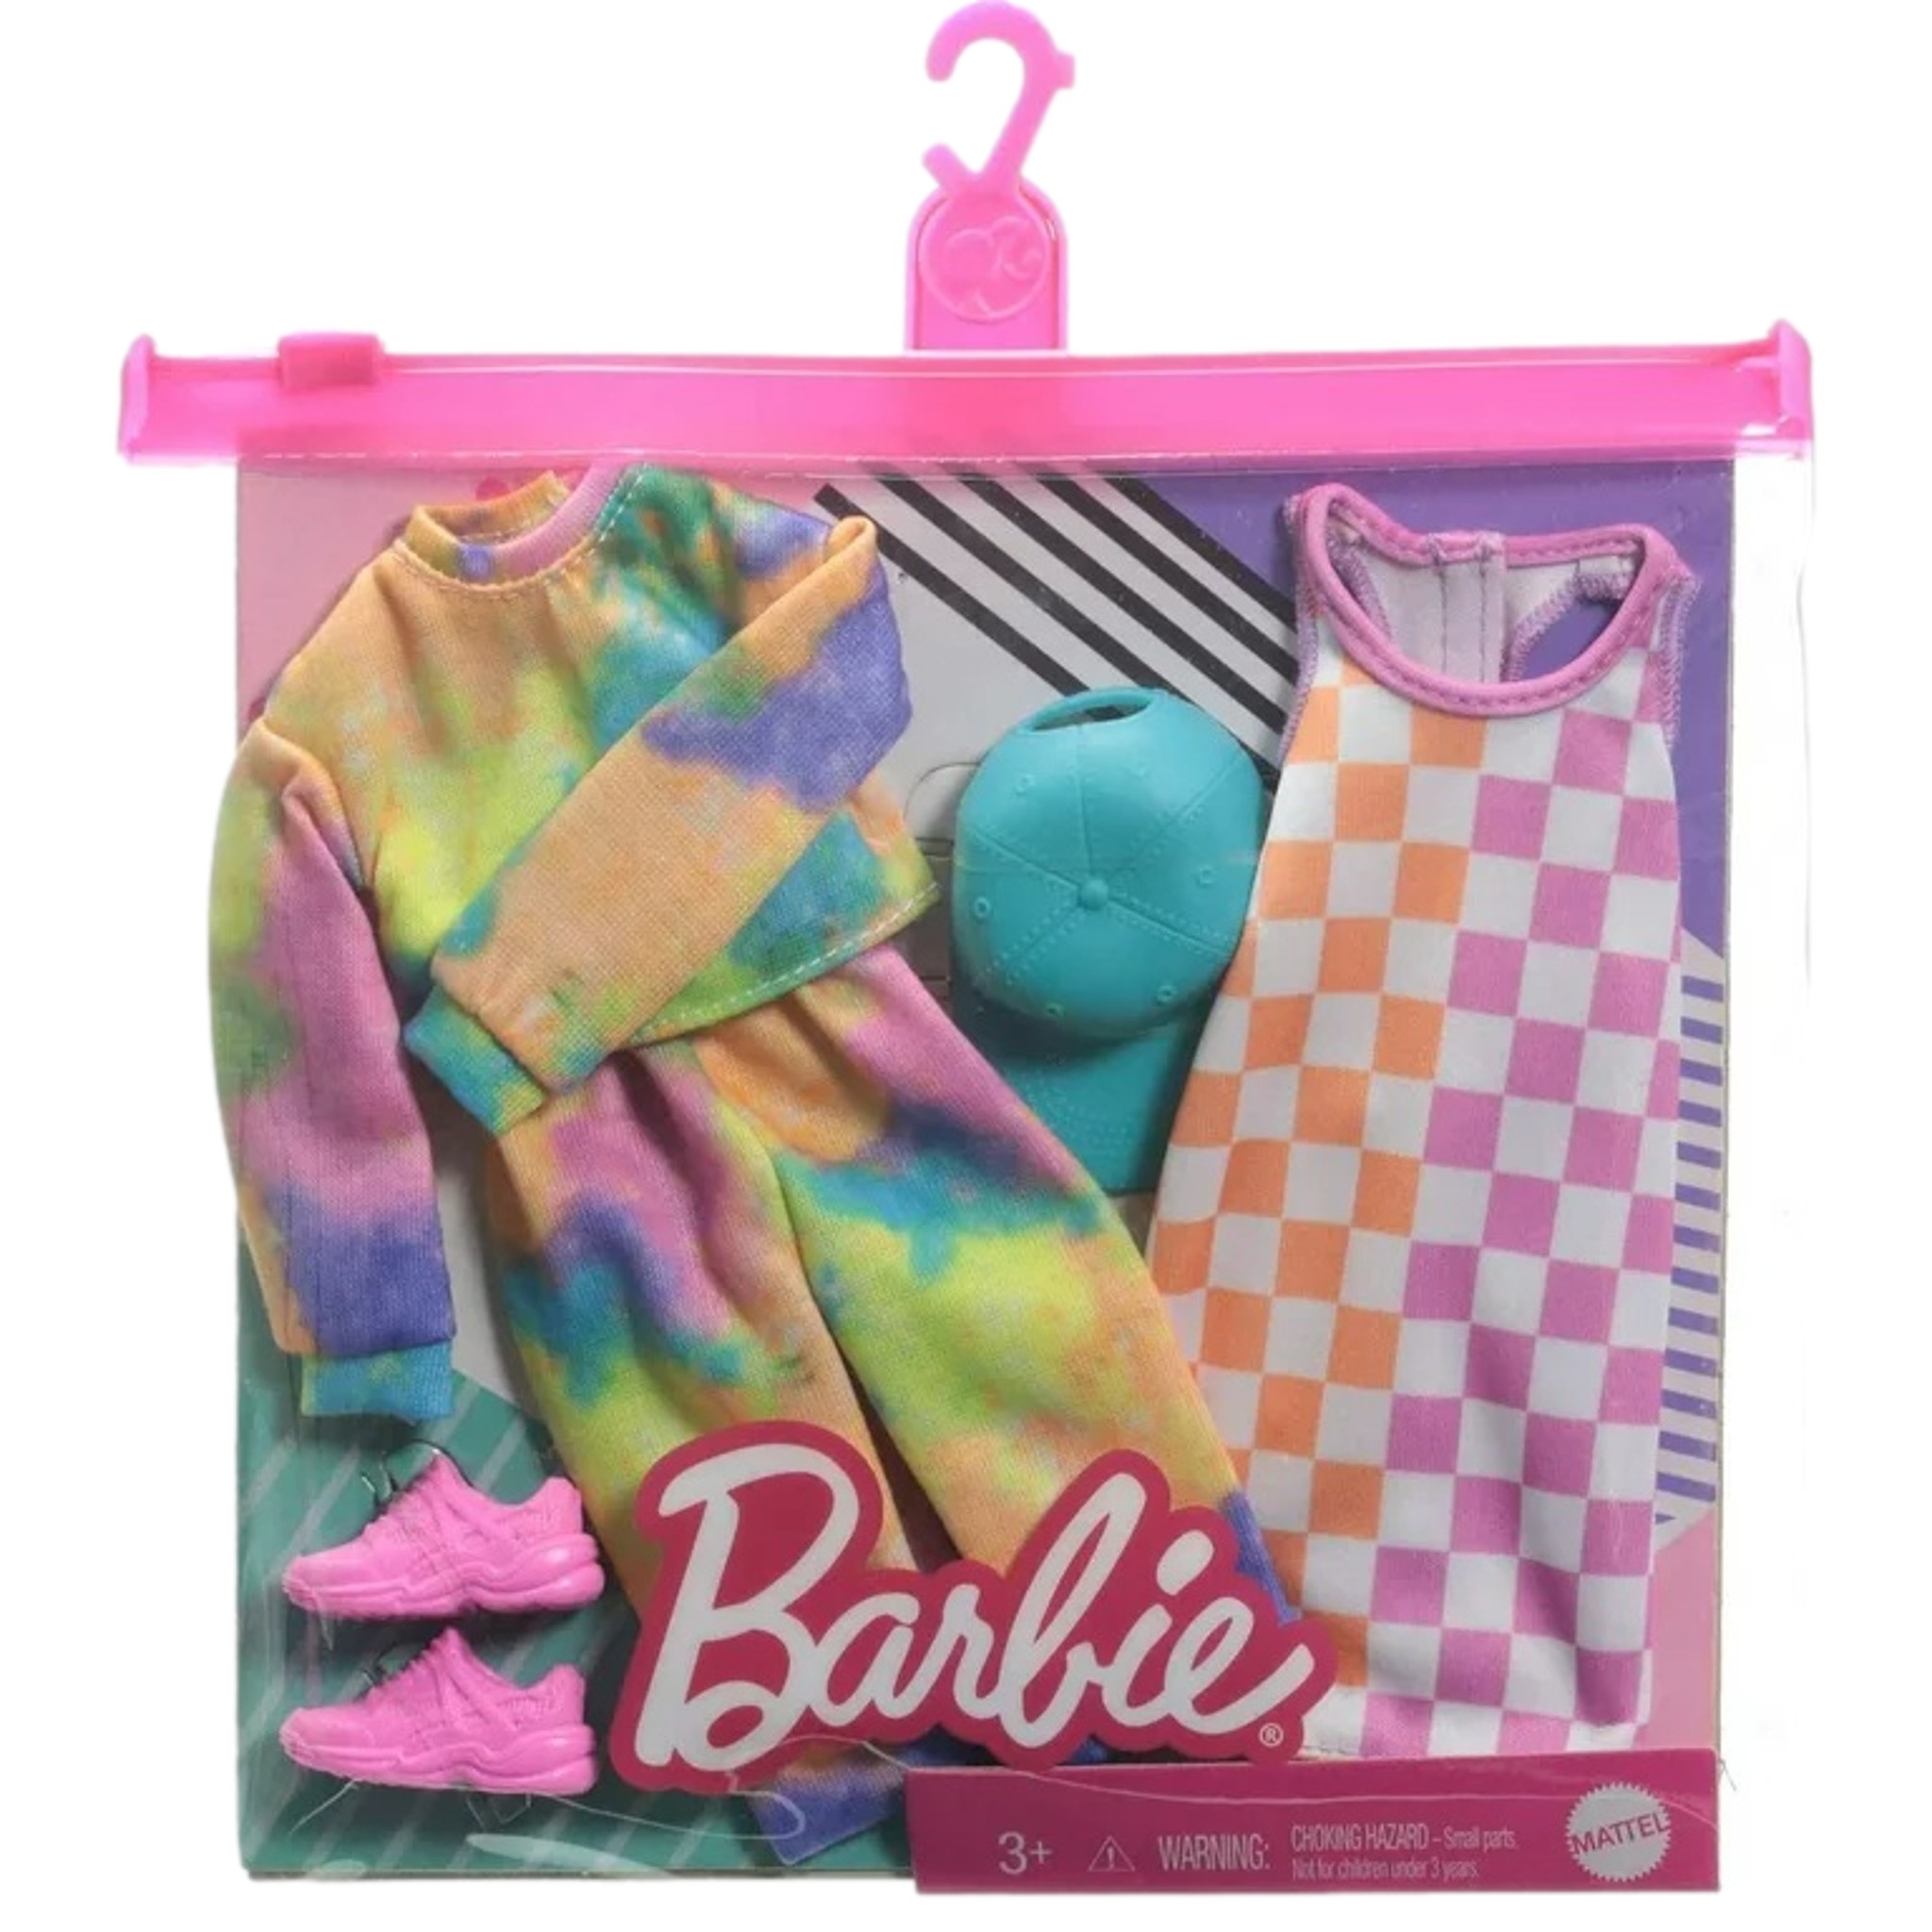 Barbie Fashion Pack Doll Clothes, Tie-Dye Sweater, Checkered Dress, Hat & Shoes